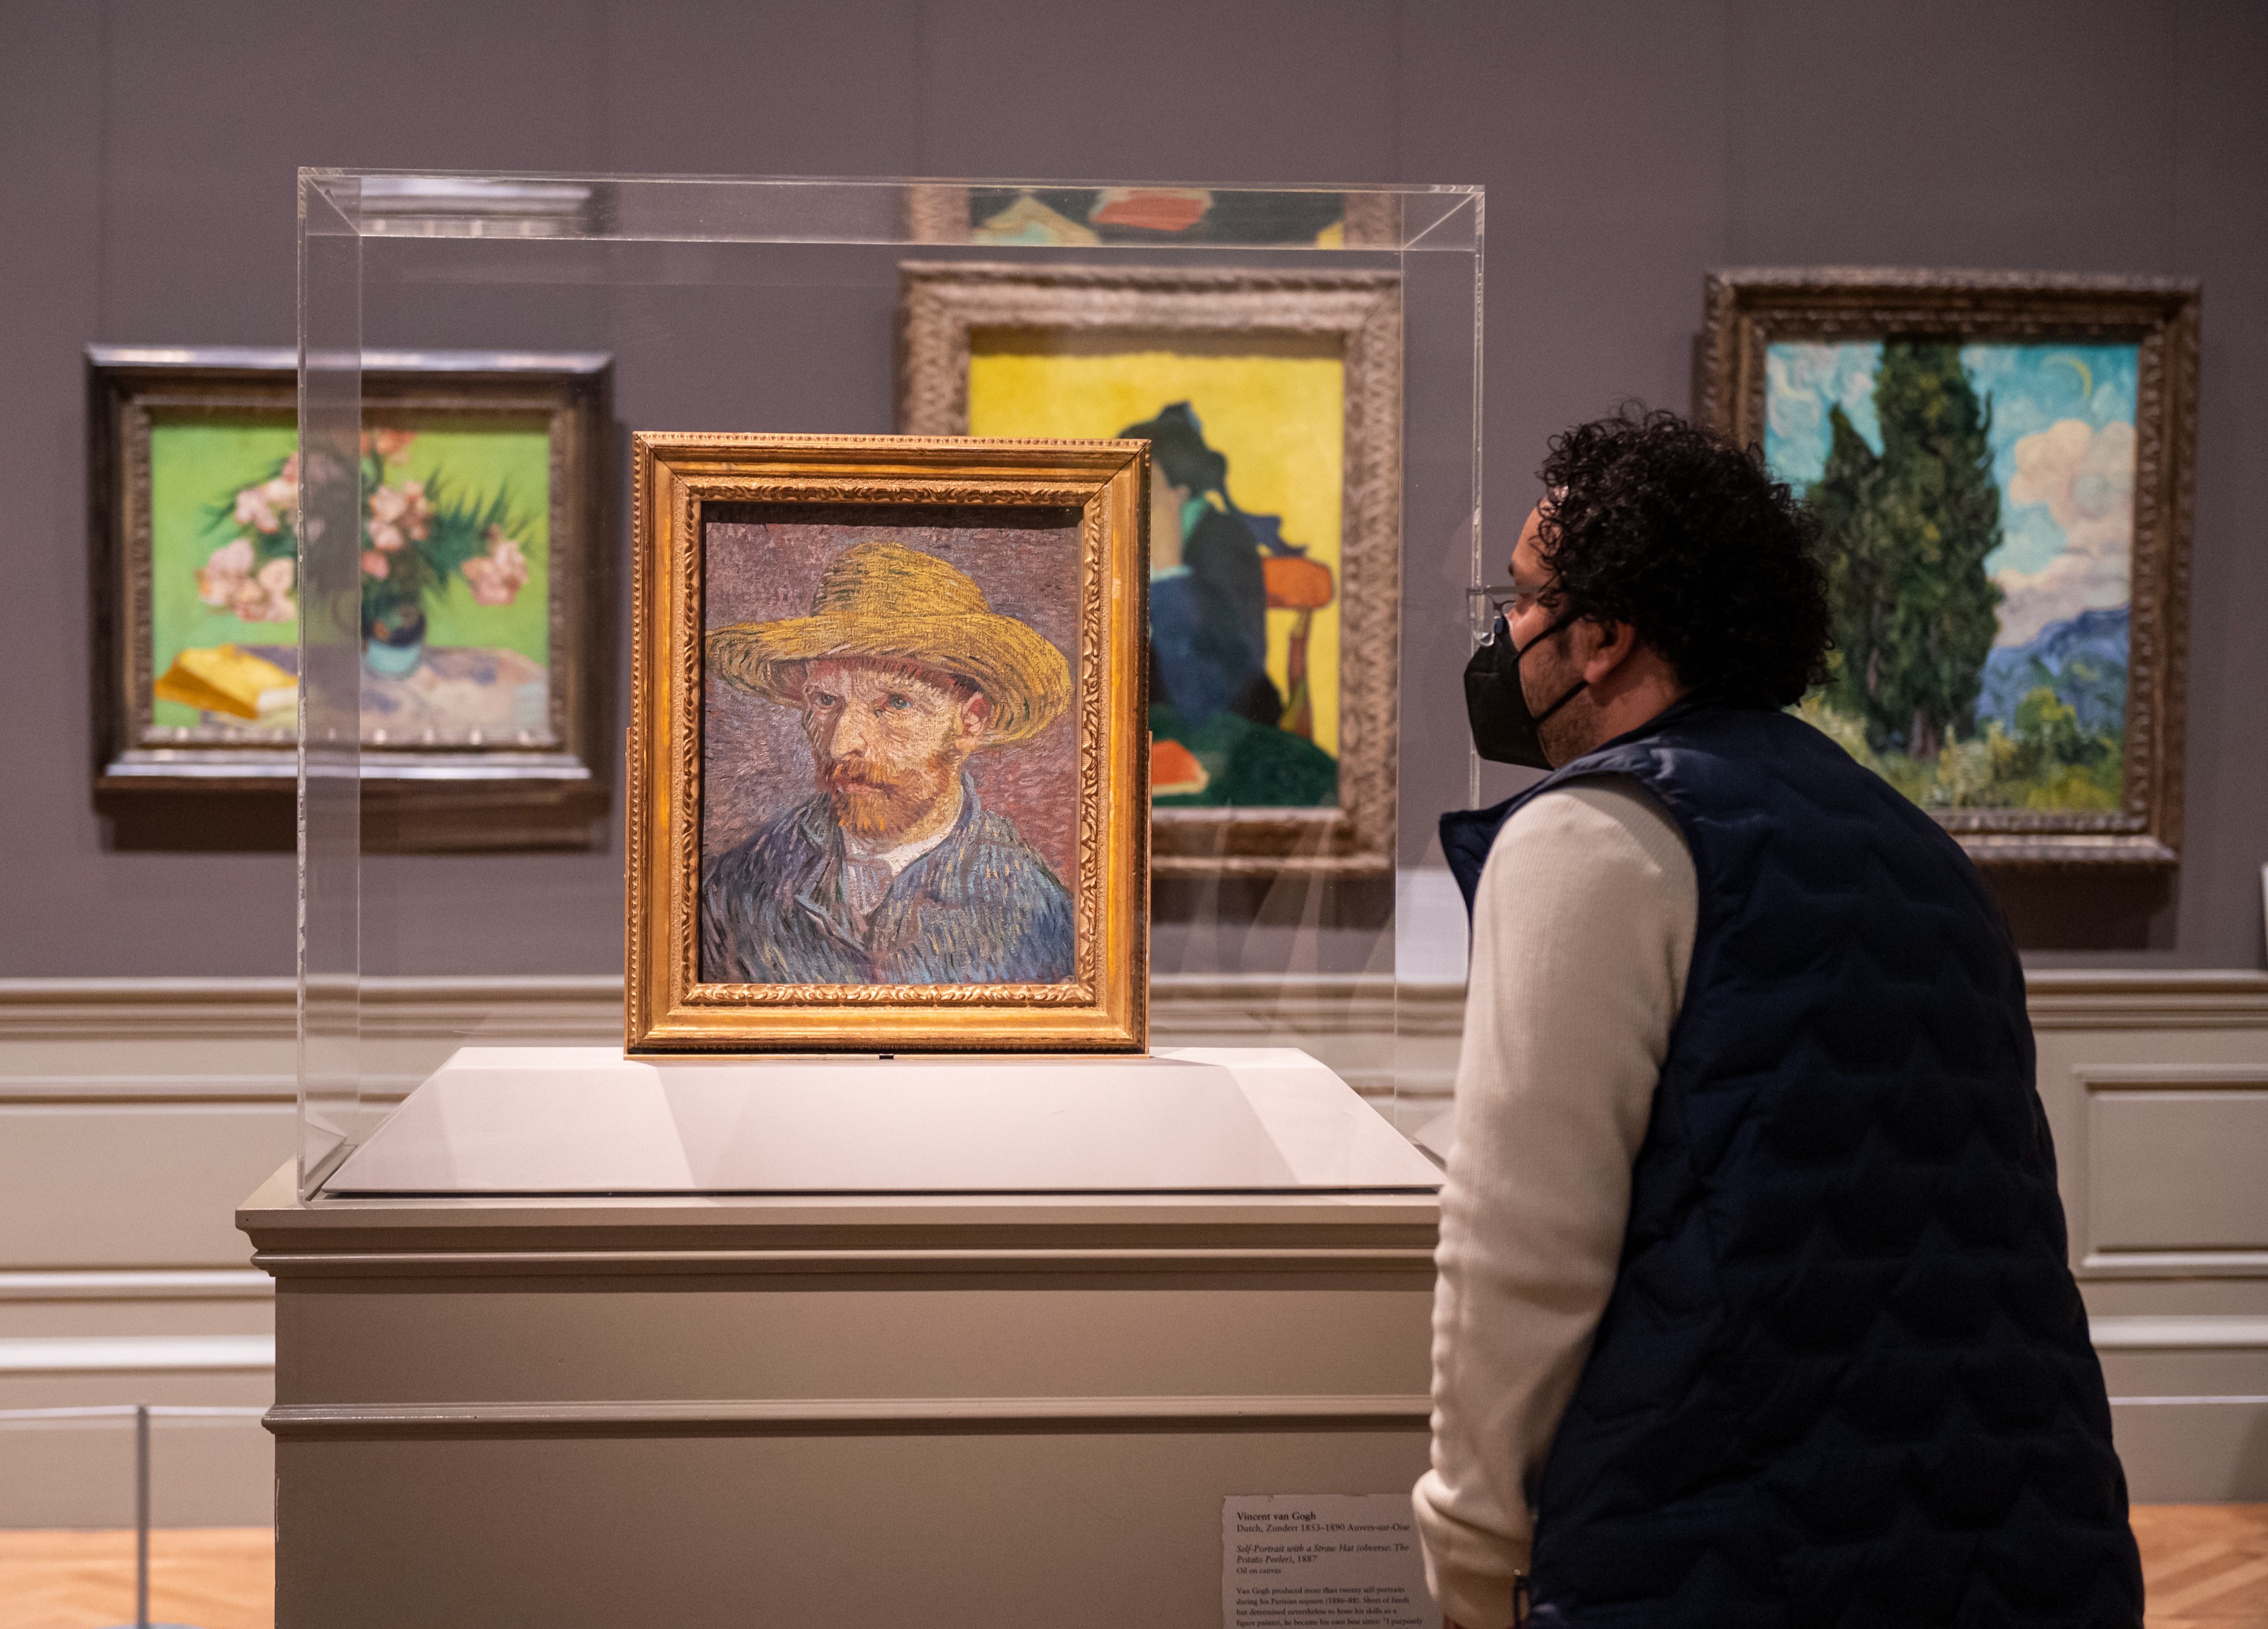 The Metropolitan Museum of Art on X: "Gogh on—head to The Met! For the first time in recent memory, all 17 of The Met's paintings by Vincent # VanGogh—the largest collection of the